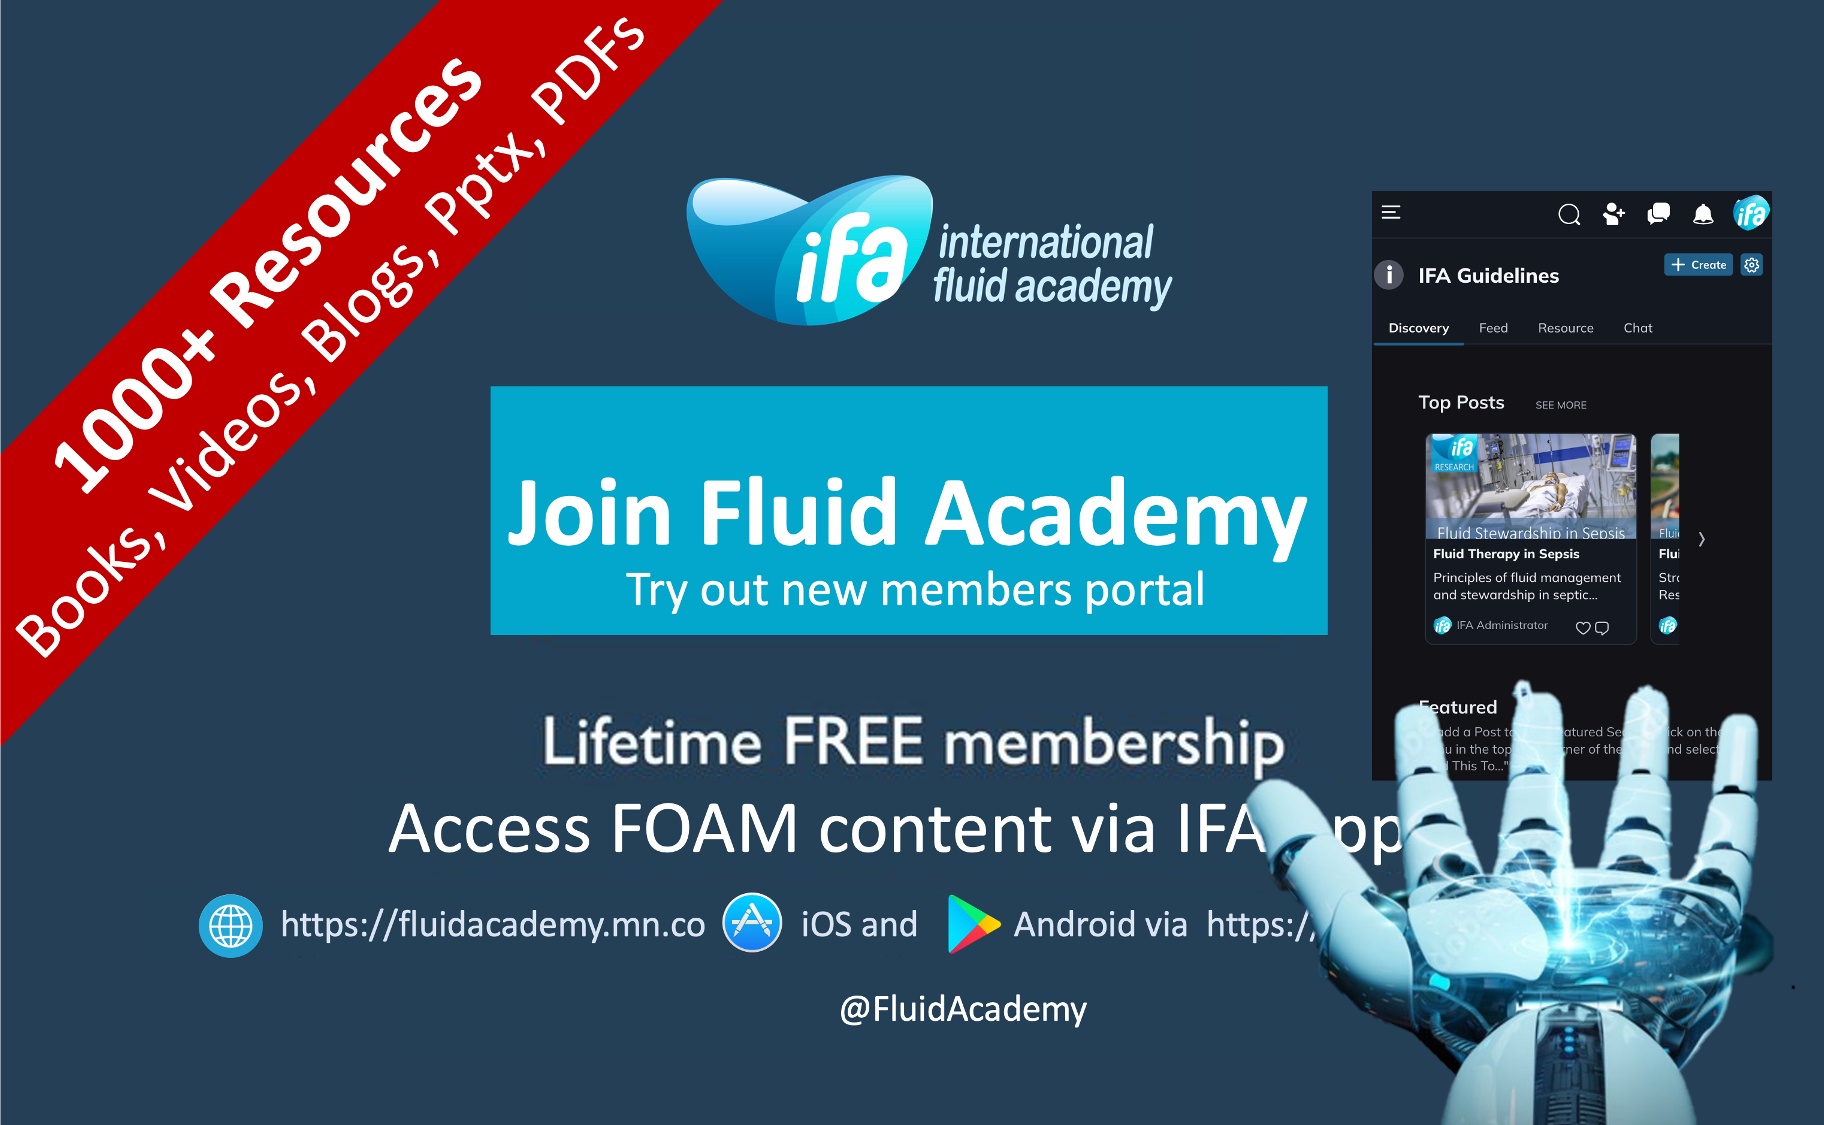 Become an IFA member